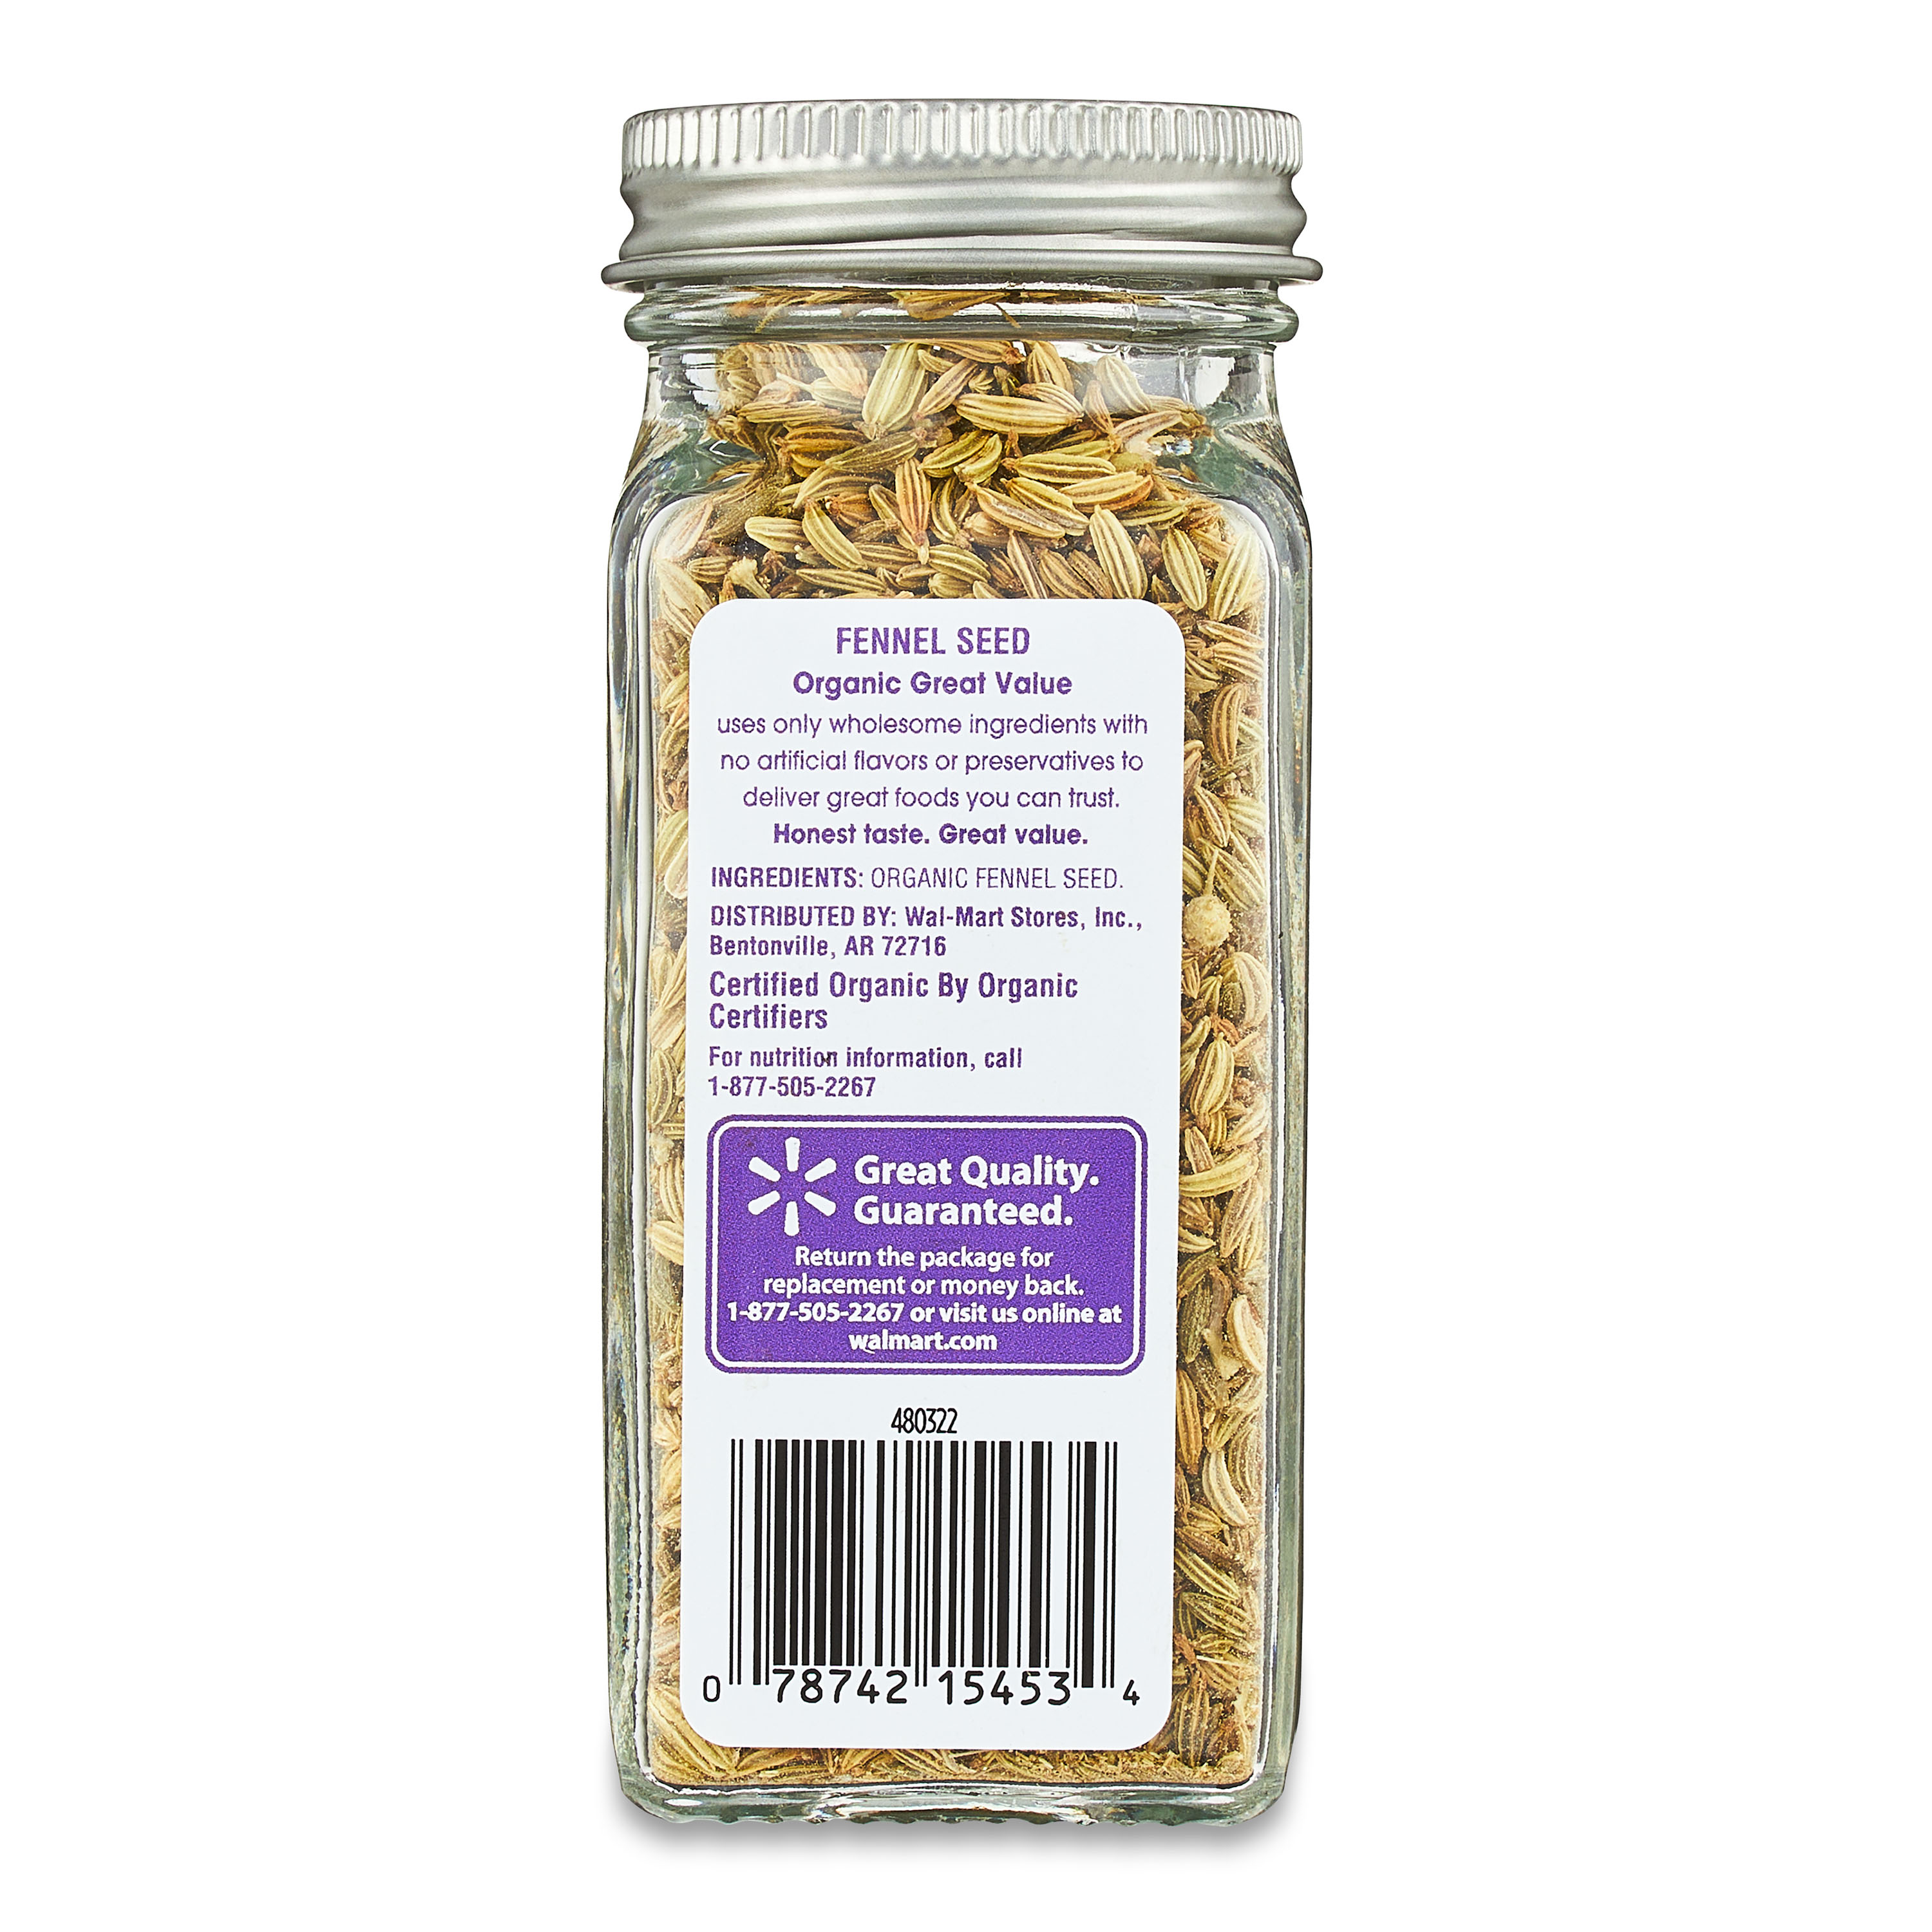 Great Value Organic Fennel Seed, 1.6 oz - image 4 of 7